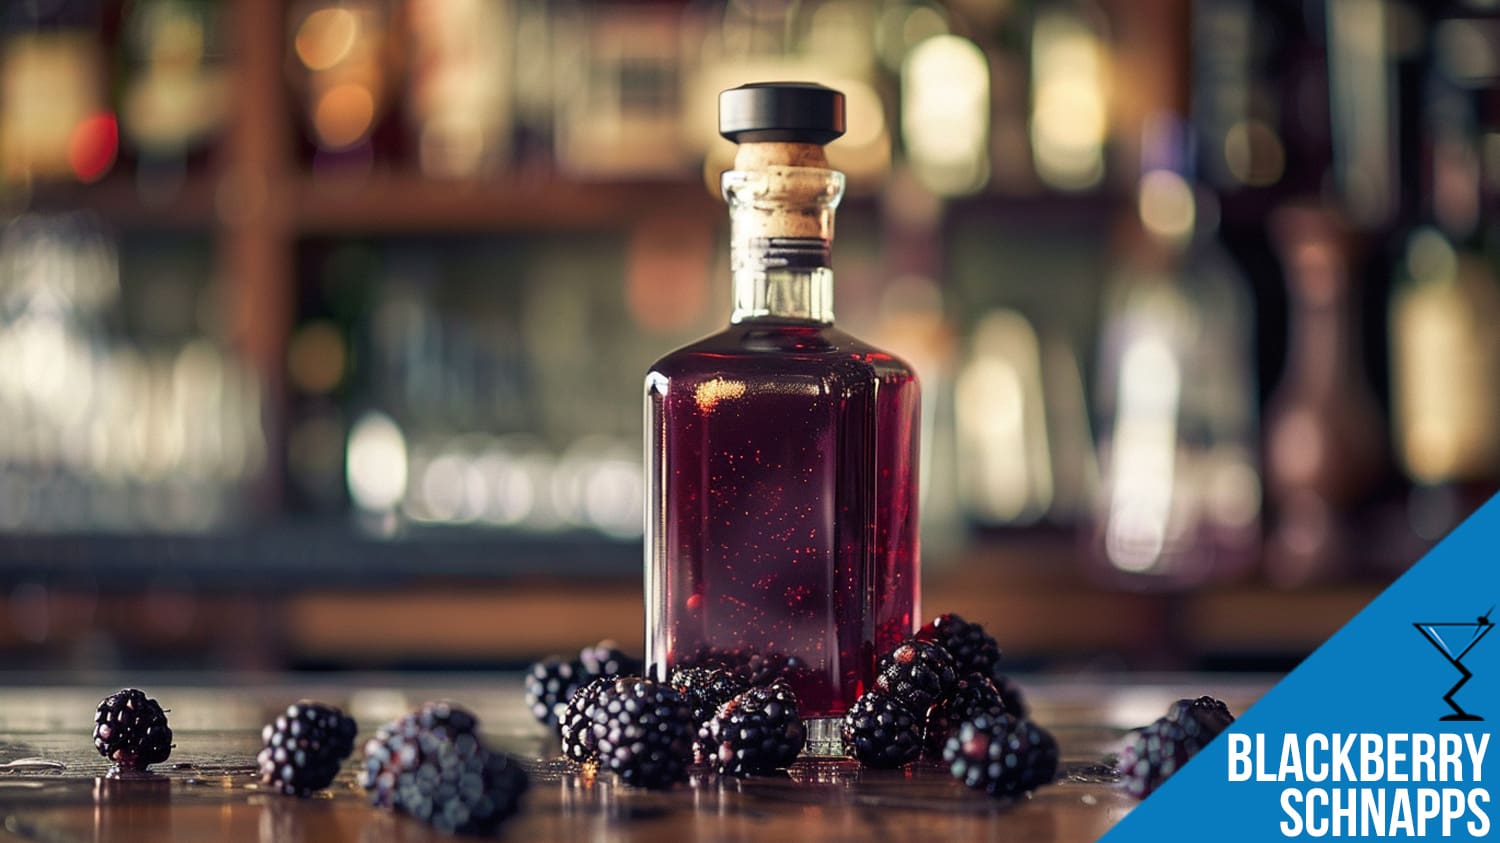 Best Blackberry Schnapps Cocktails: Recipes, Flavors, and Top Brands